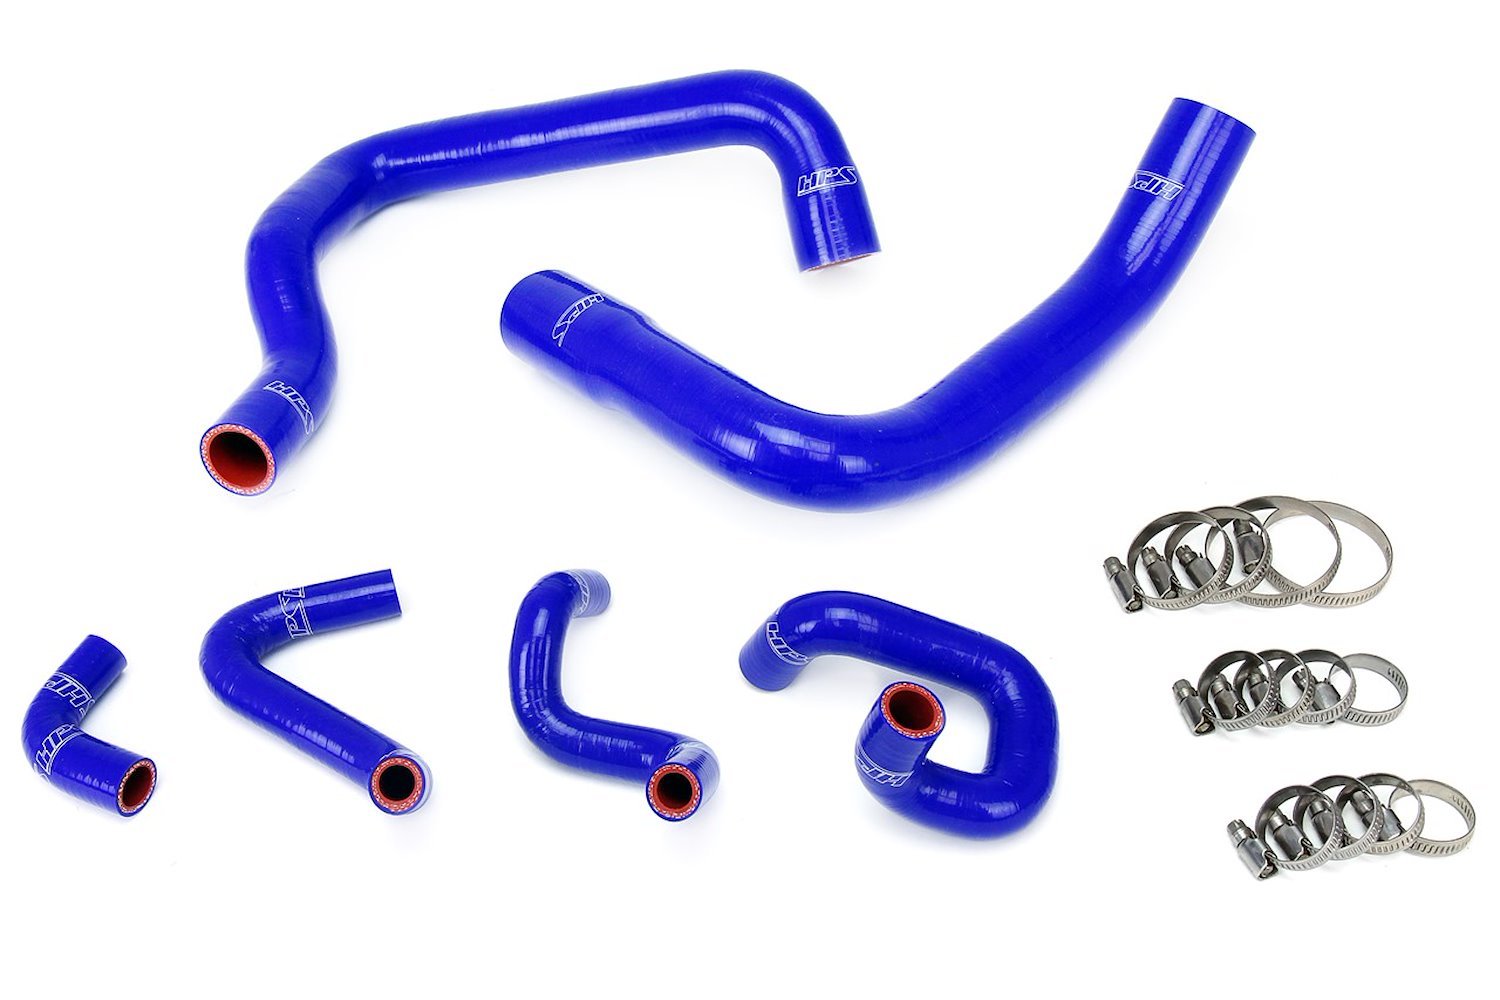 57-1010-BLUE Coolant Hose Kit, High-Temp 3-Ply Reinforced Silicone, Replace Rubber Radiator Heater Coolant Hoses